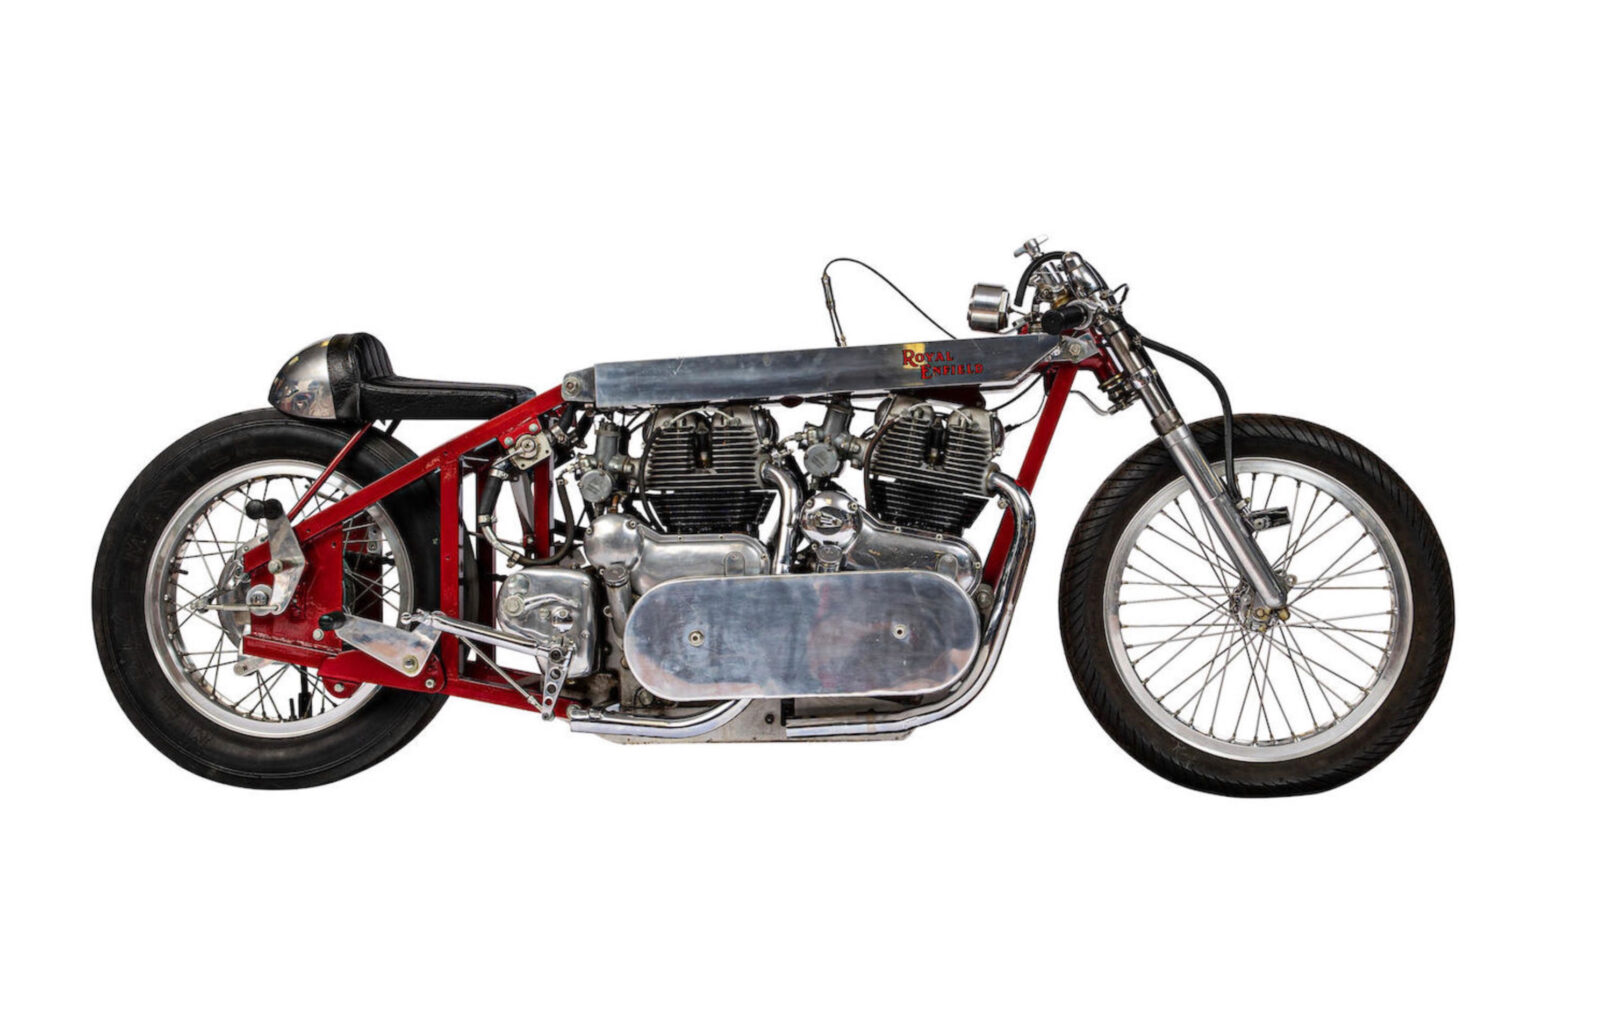 Twin Engined Royal Enfield Land Speed Racer The First Naked Bike To Exceed 200 Mph